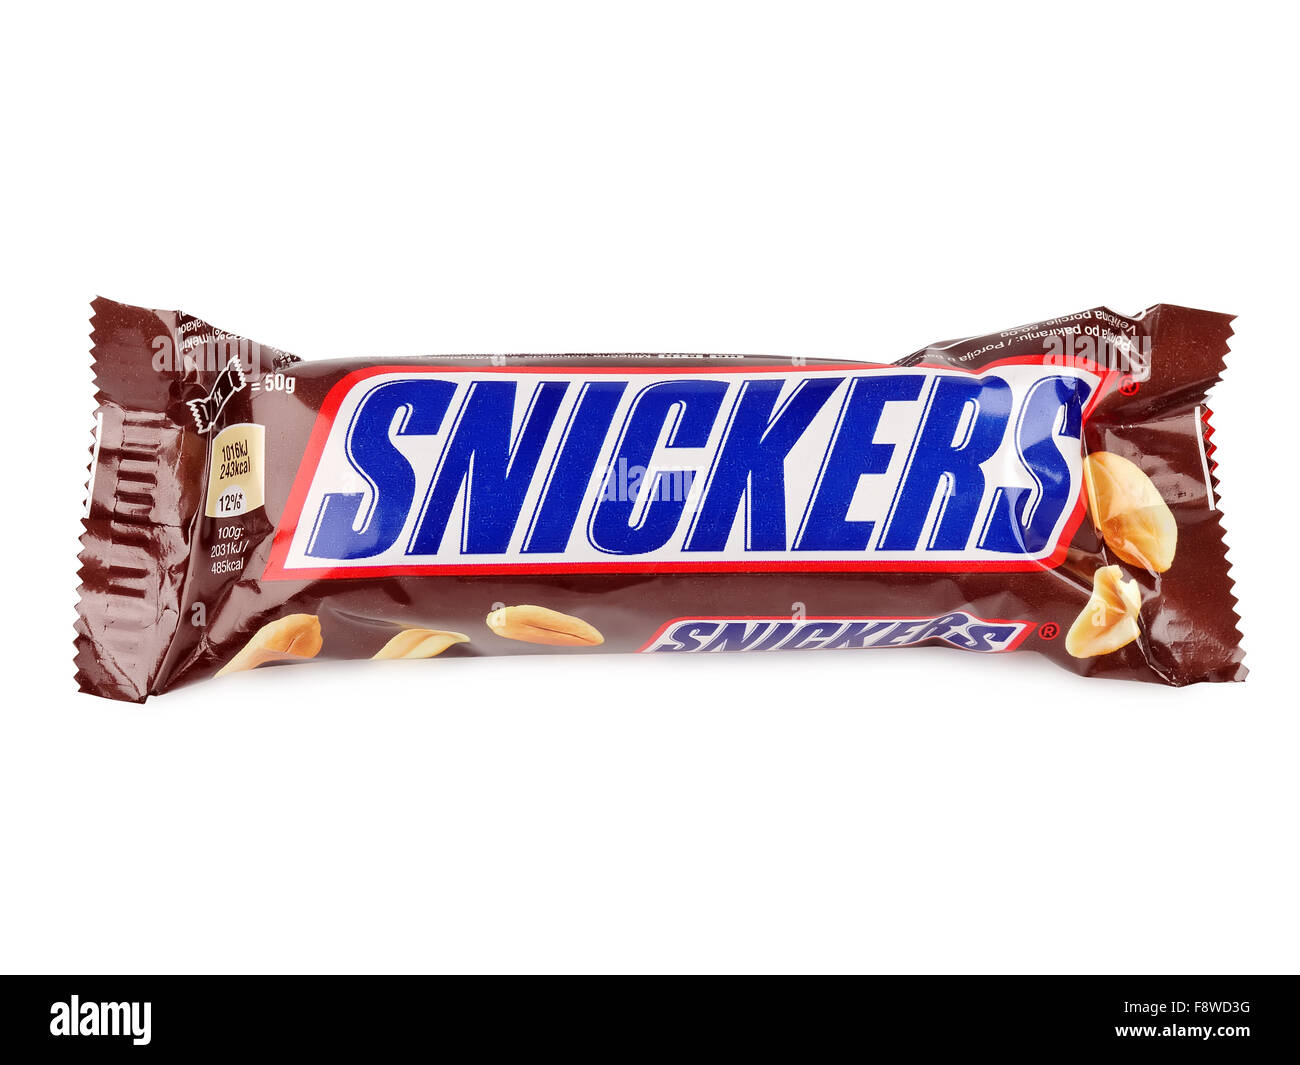 Snickers chocolate bar isolated on white background. Snickers bars are produced by Mars Incorporation Stock Photo